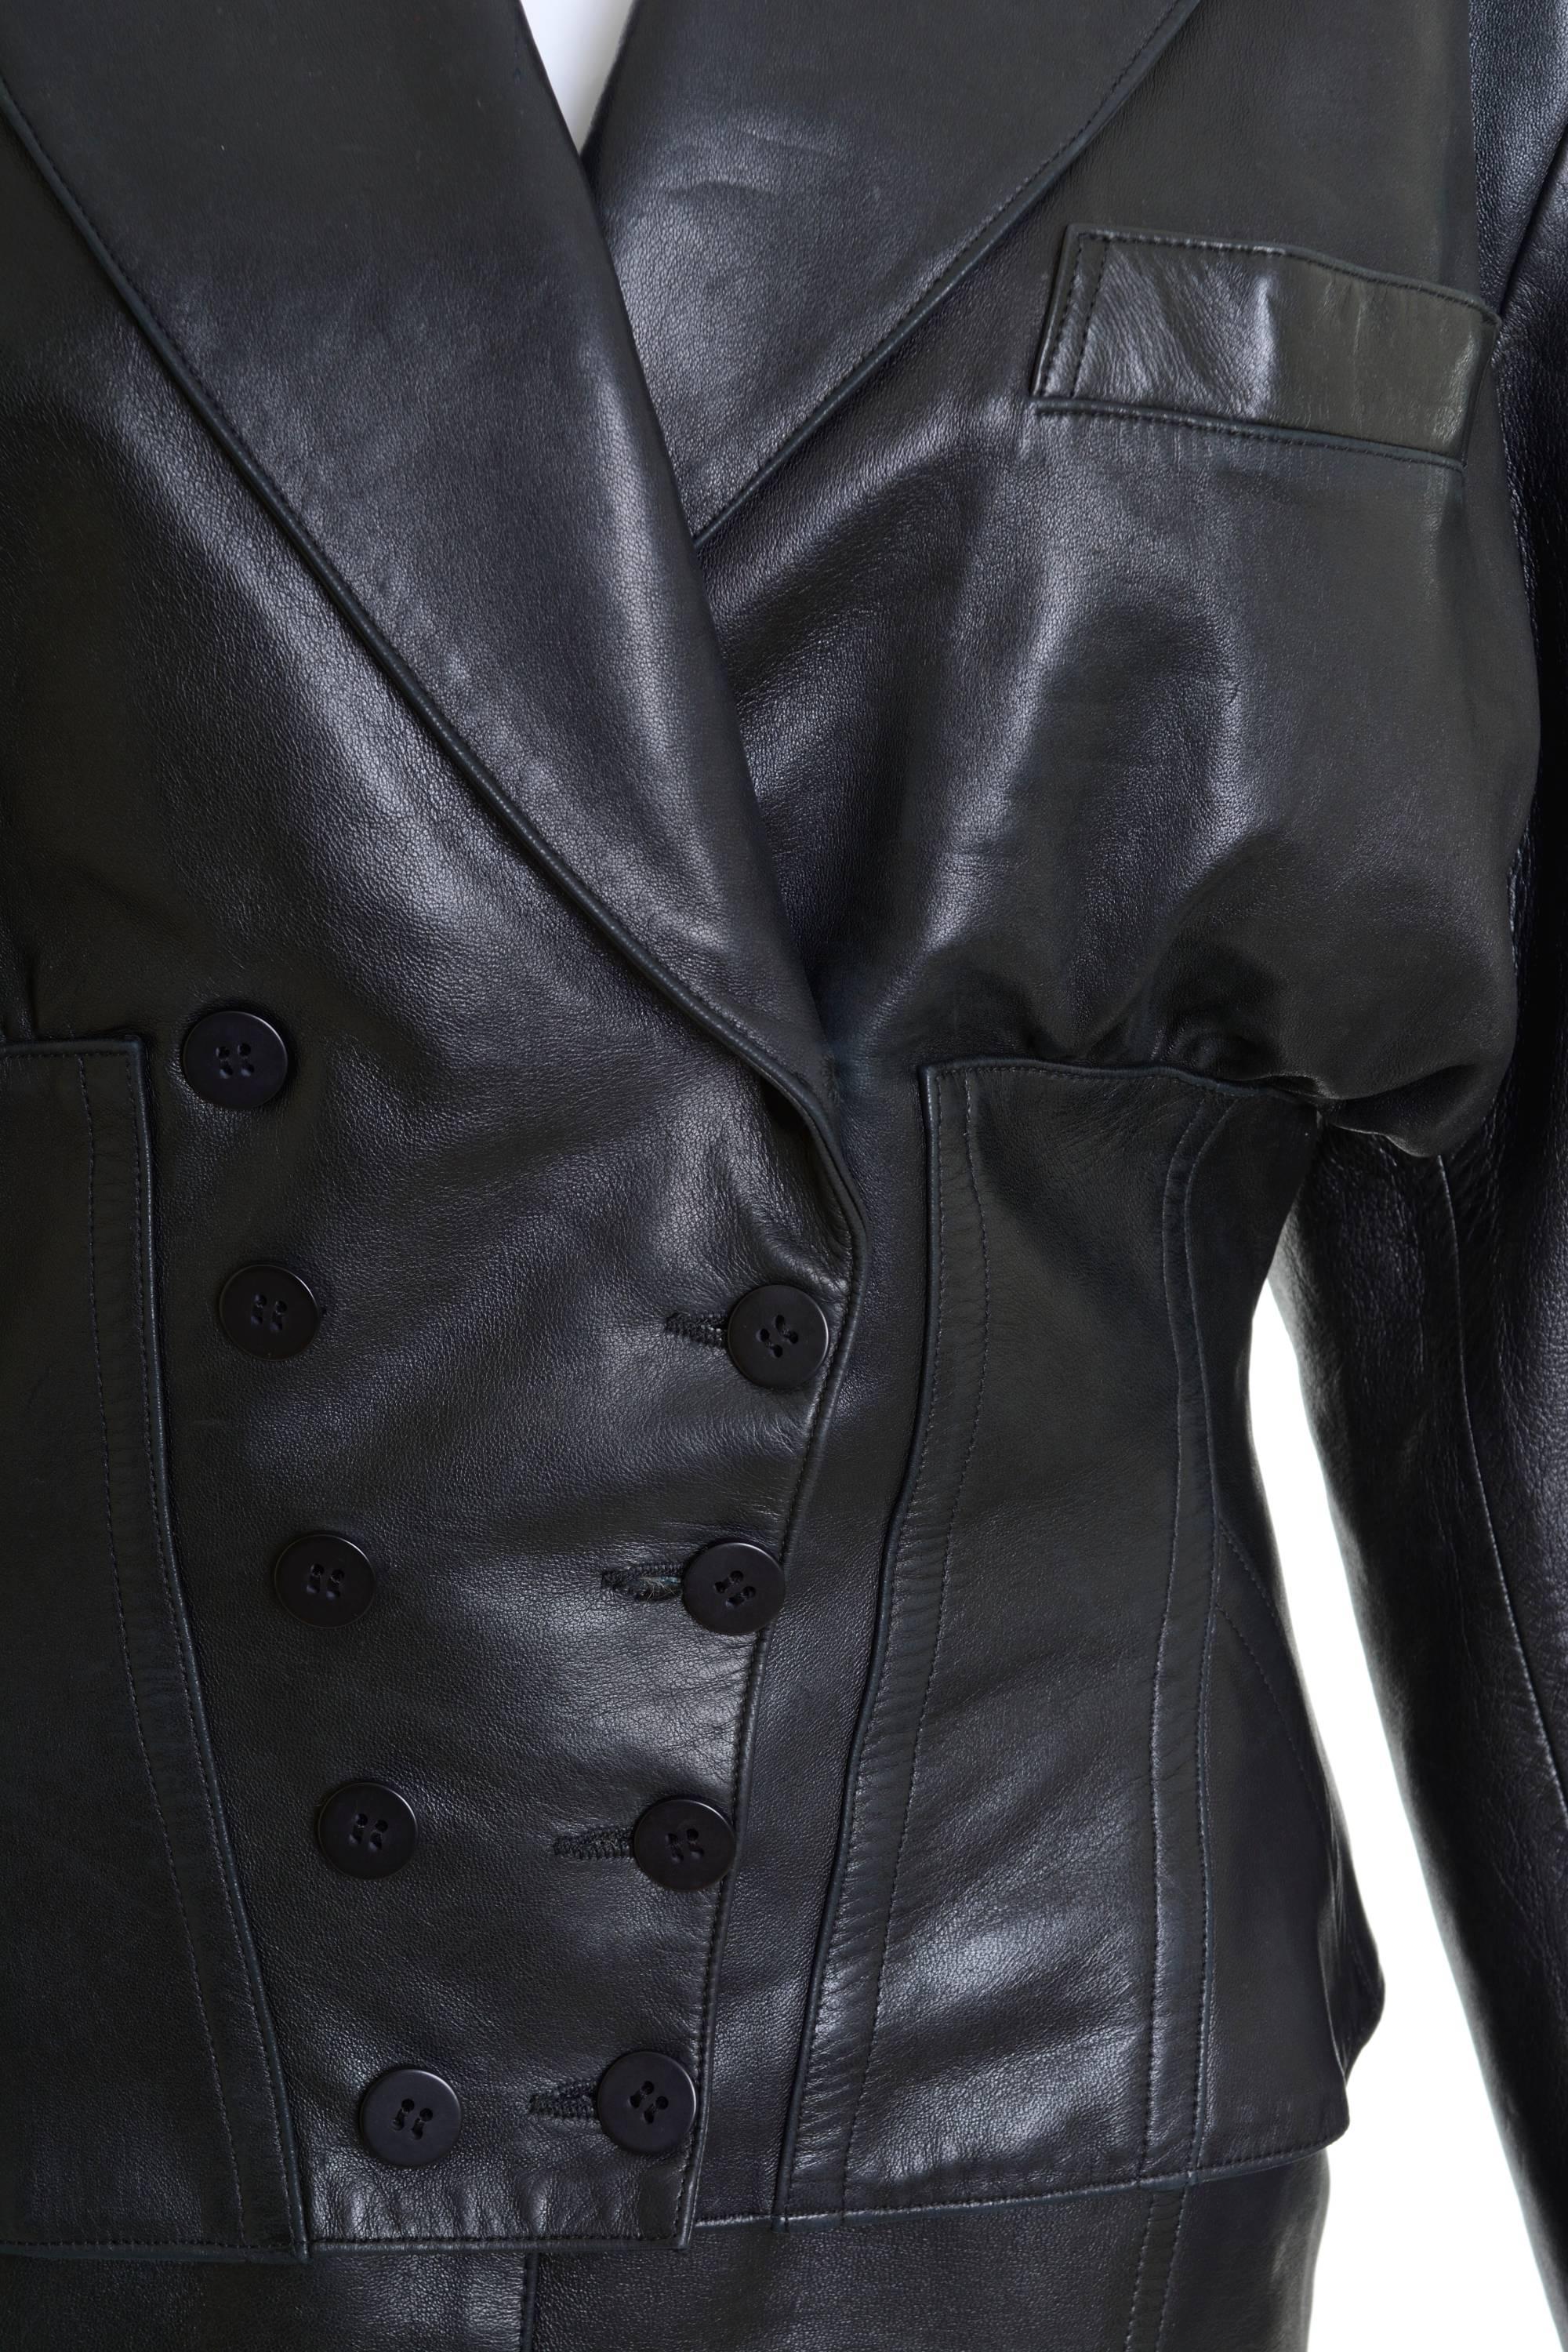 1990s Alaïa Black Leather Jacket & Skirt In Good Condition For Sale In Milan, Italy